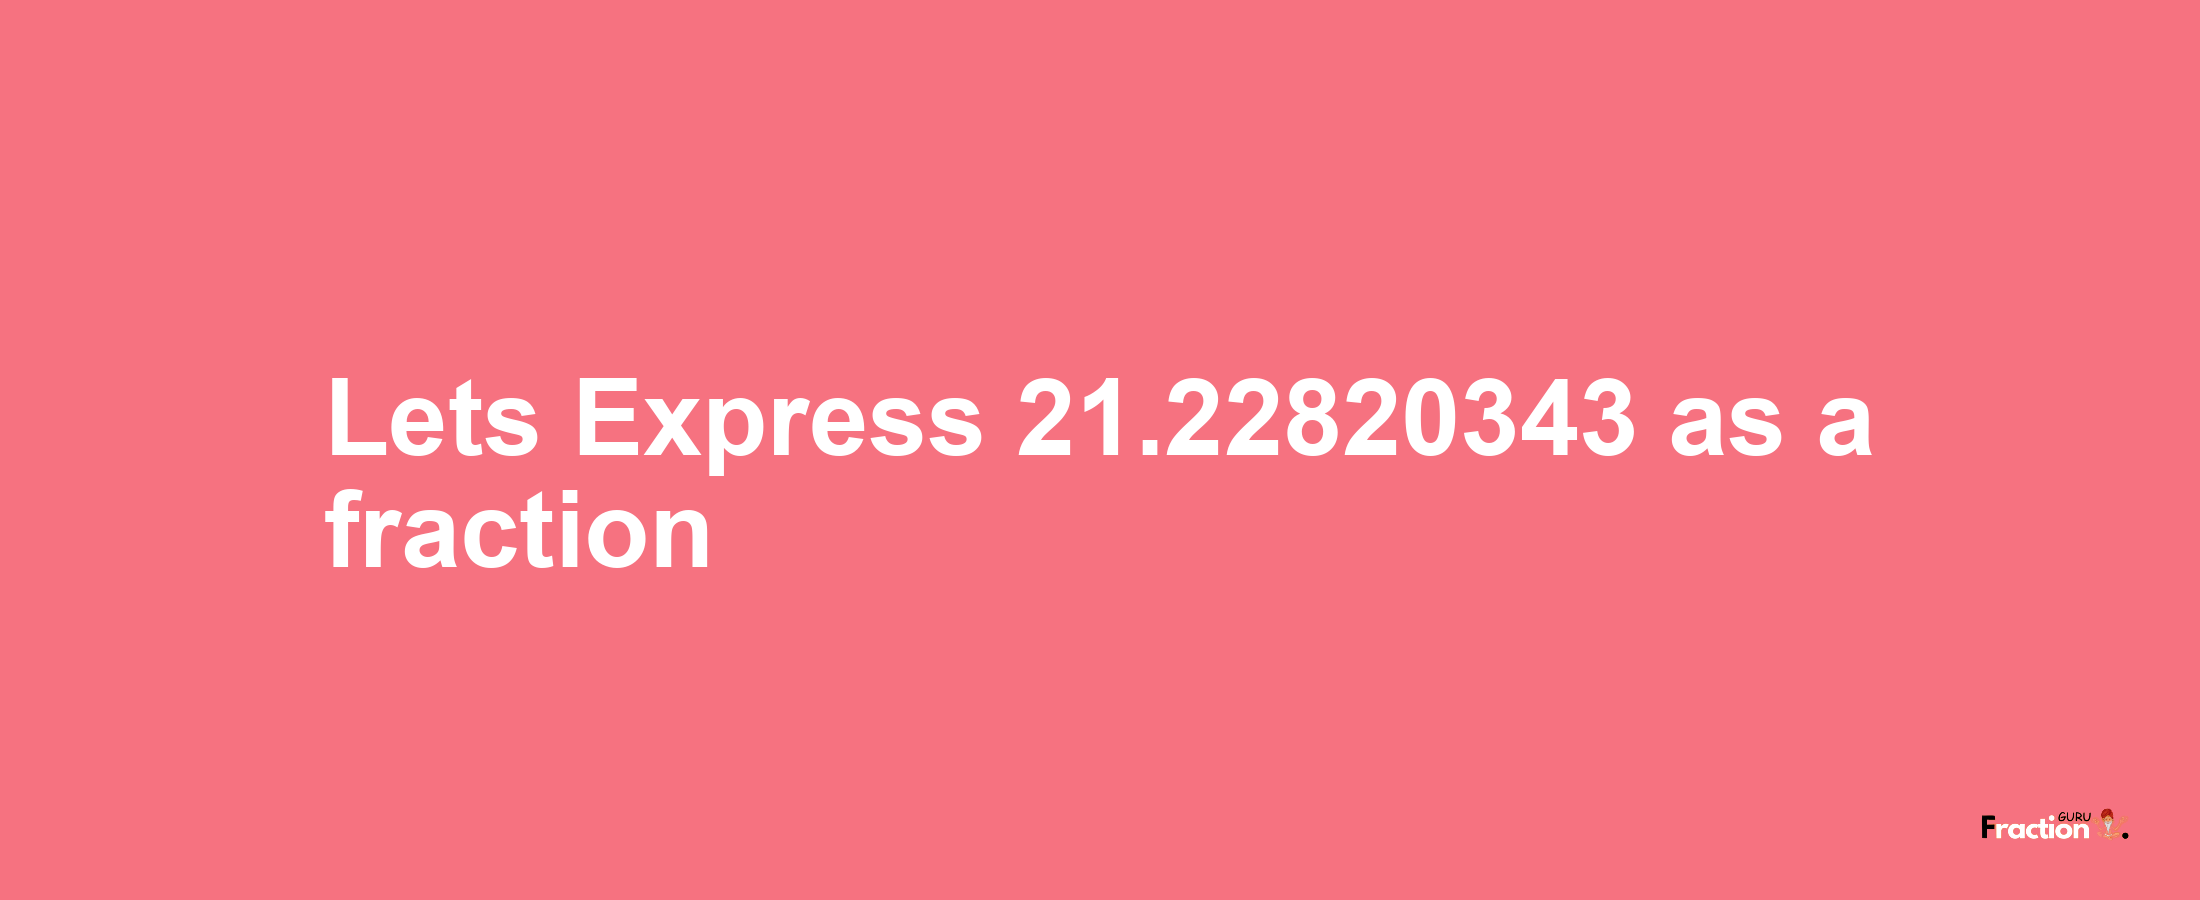 Lets Express 21.22820343 as afraction